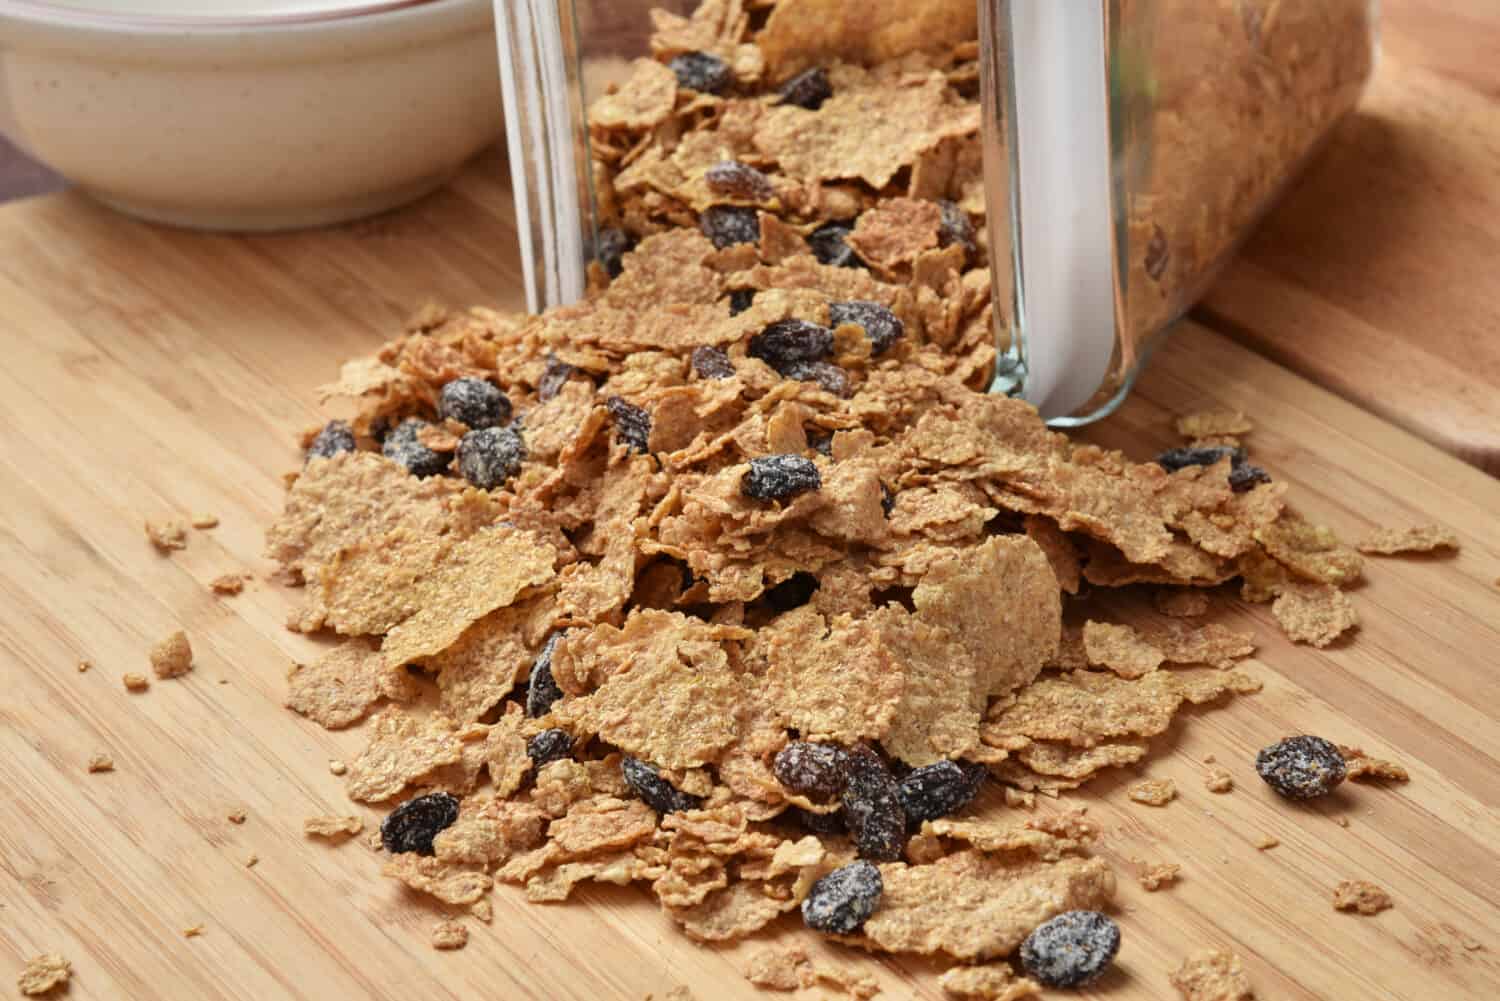 Bran and raisin cereal spilling out of a glass canister